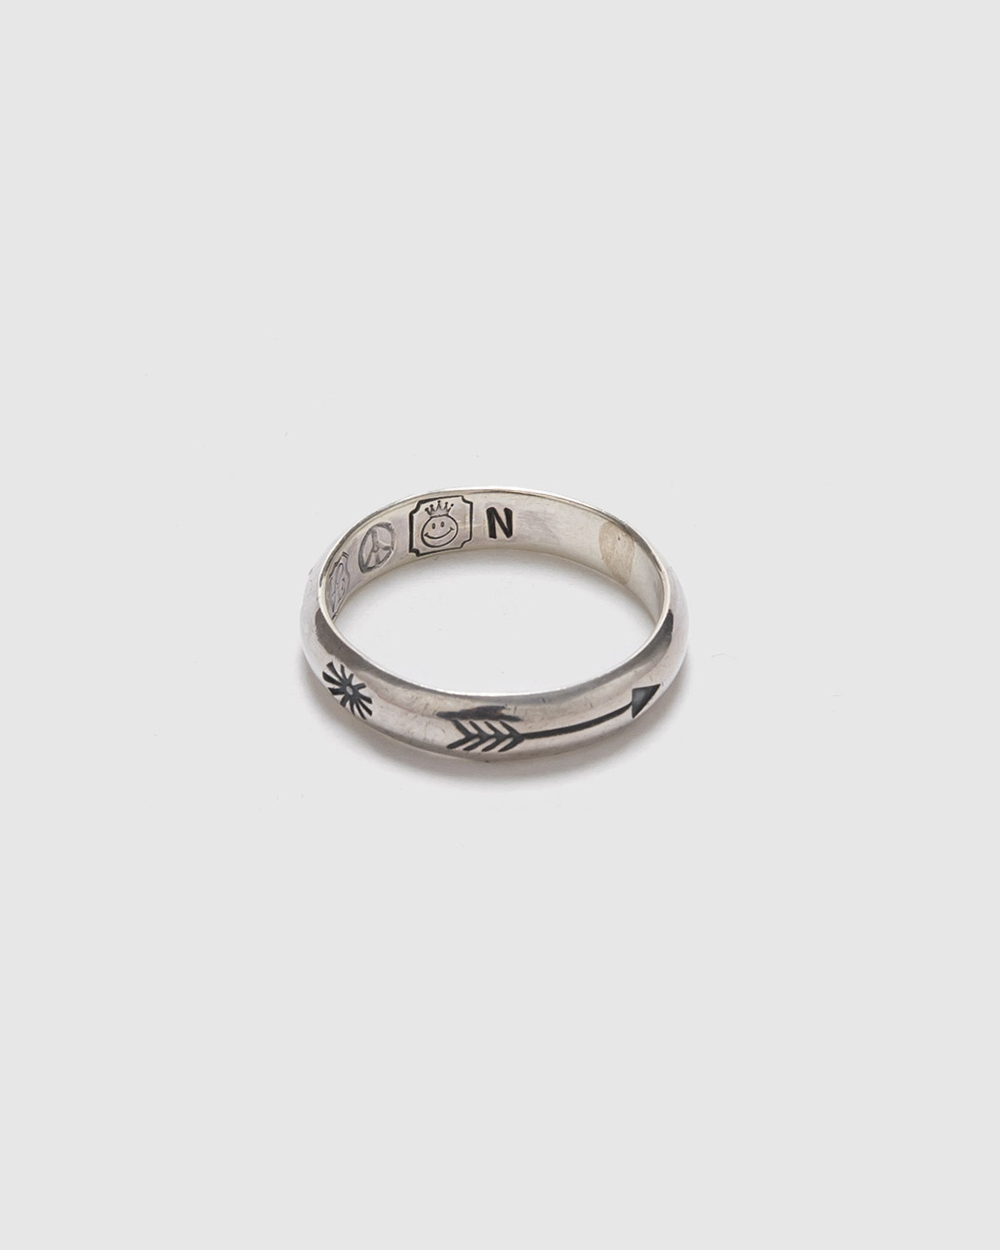 900 Silver Stamp Ring (W-024)